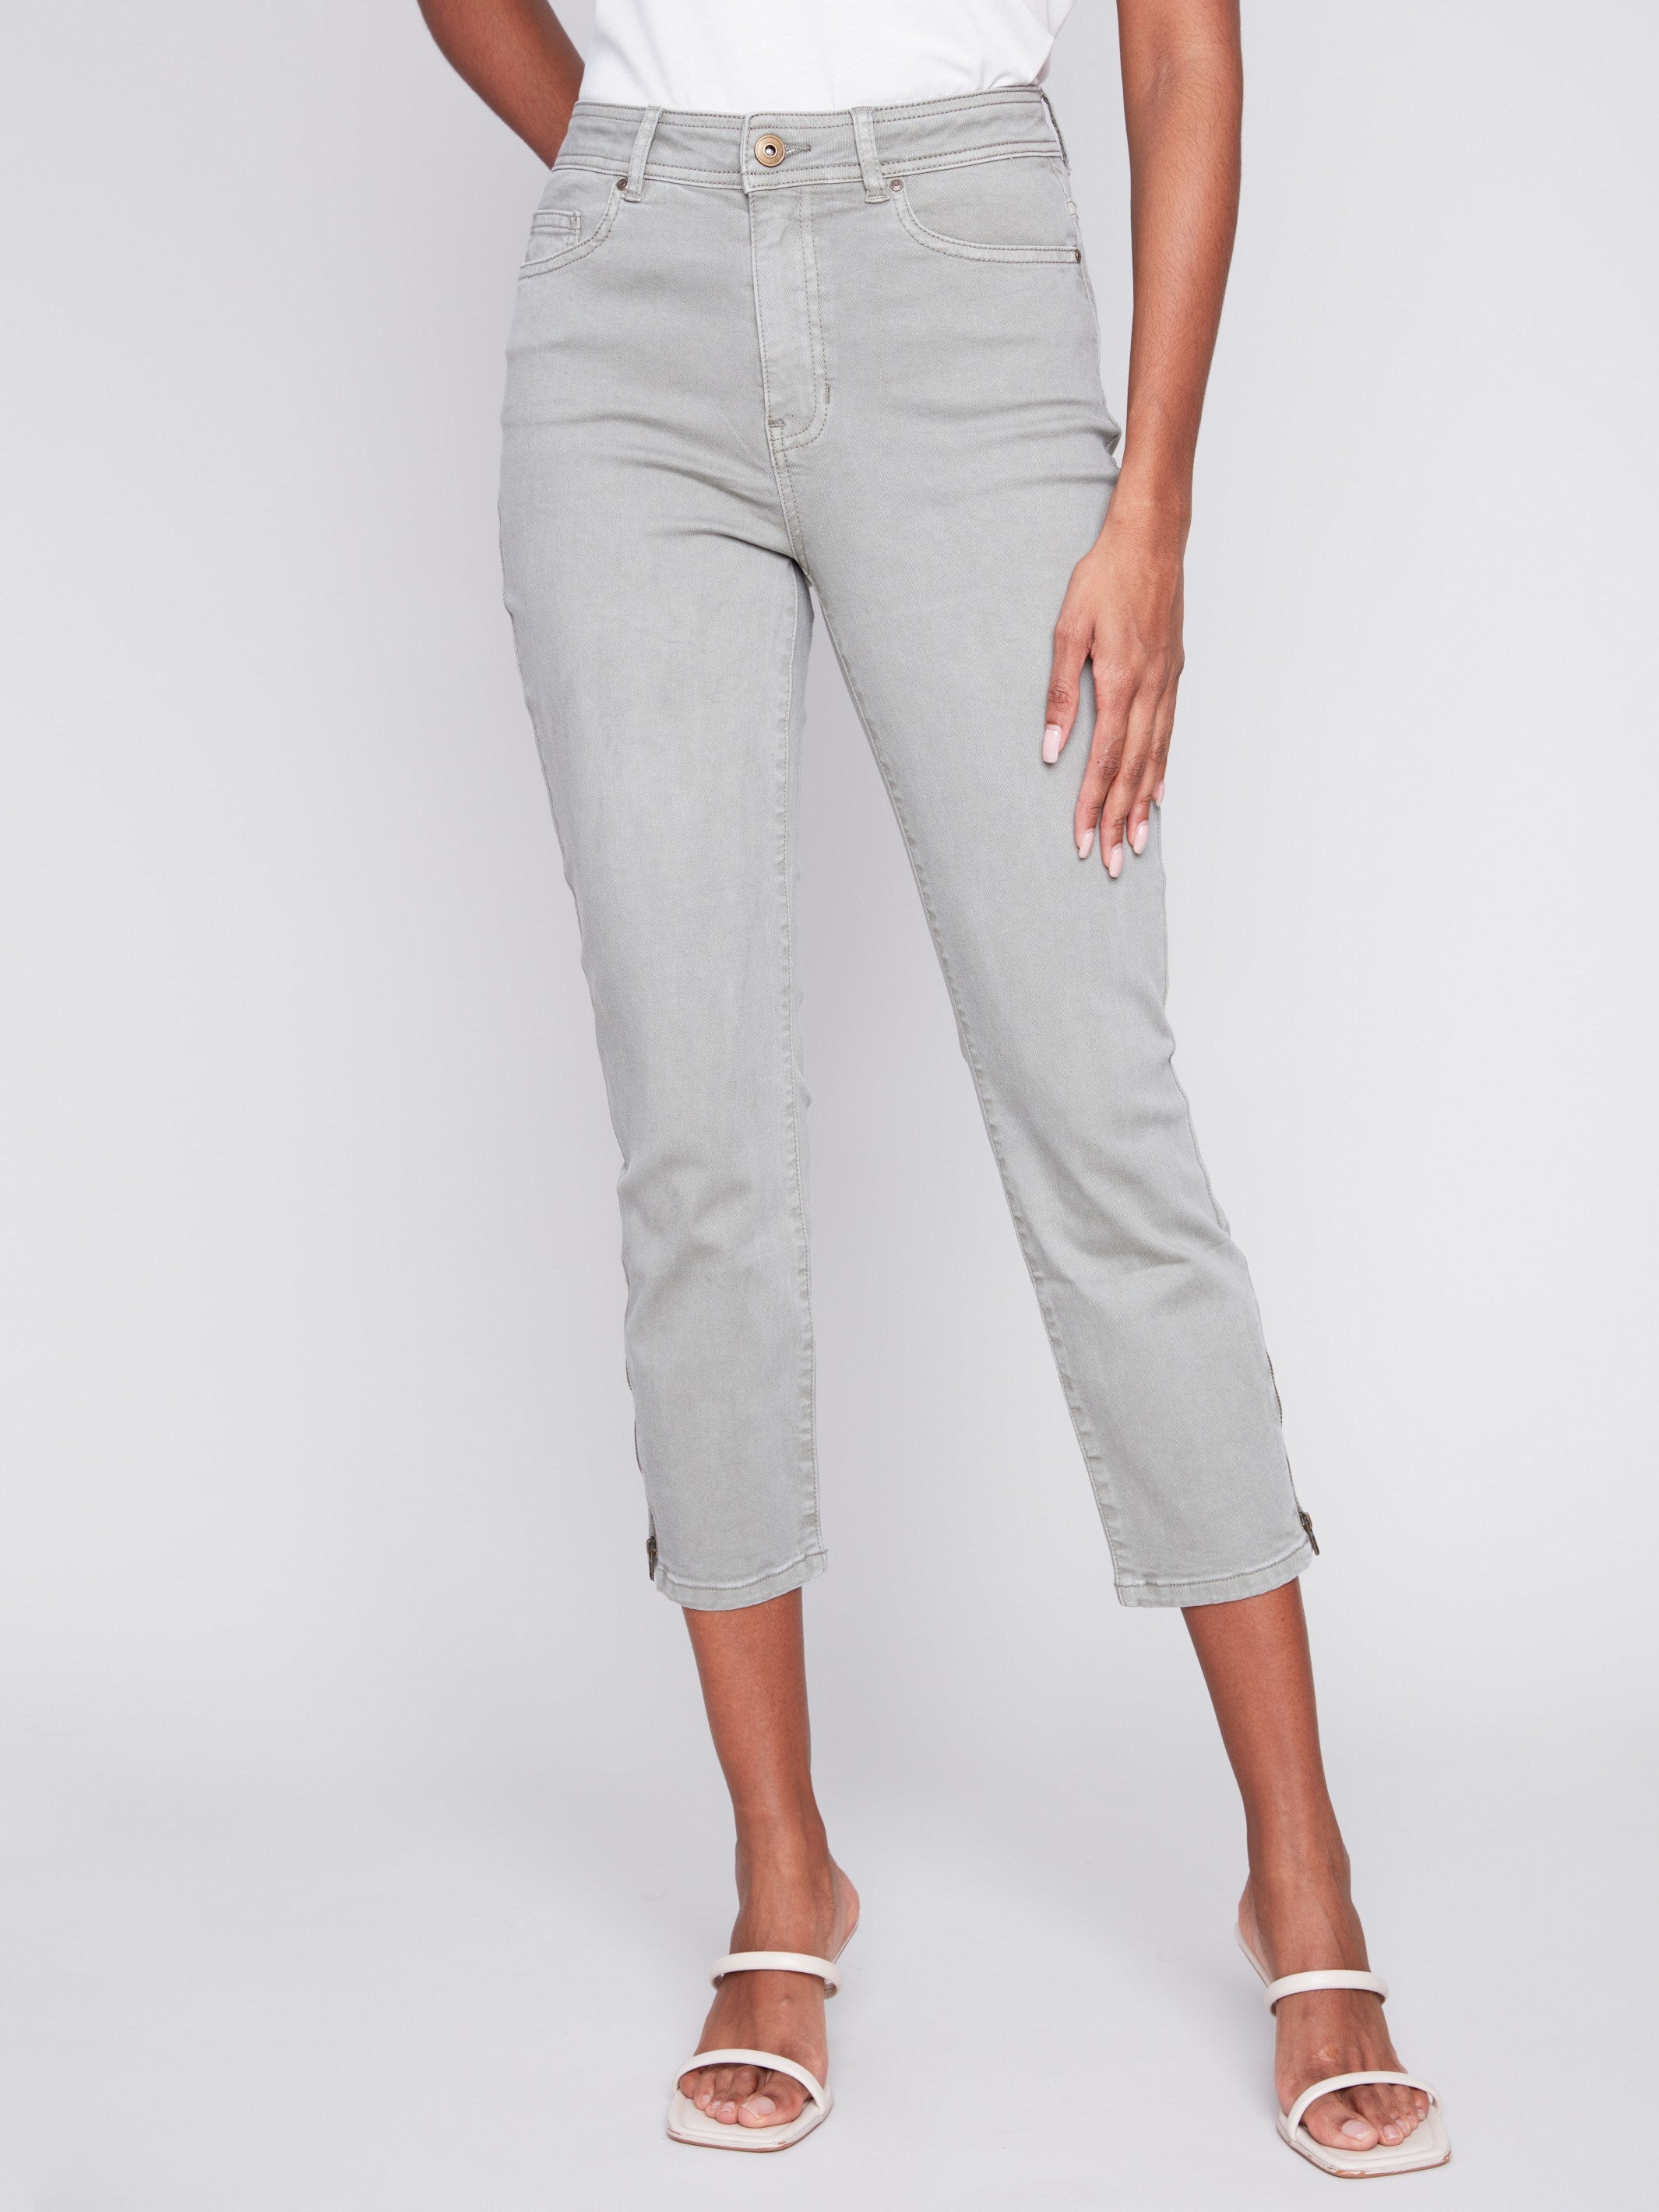 Cropped Twill Pants with Zipper Detail - Celadon - Charlie B Collection Canada - Image 3